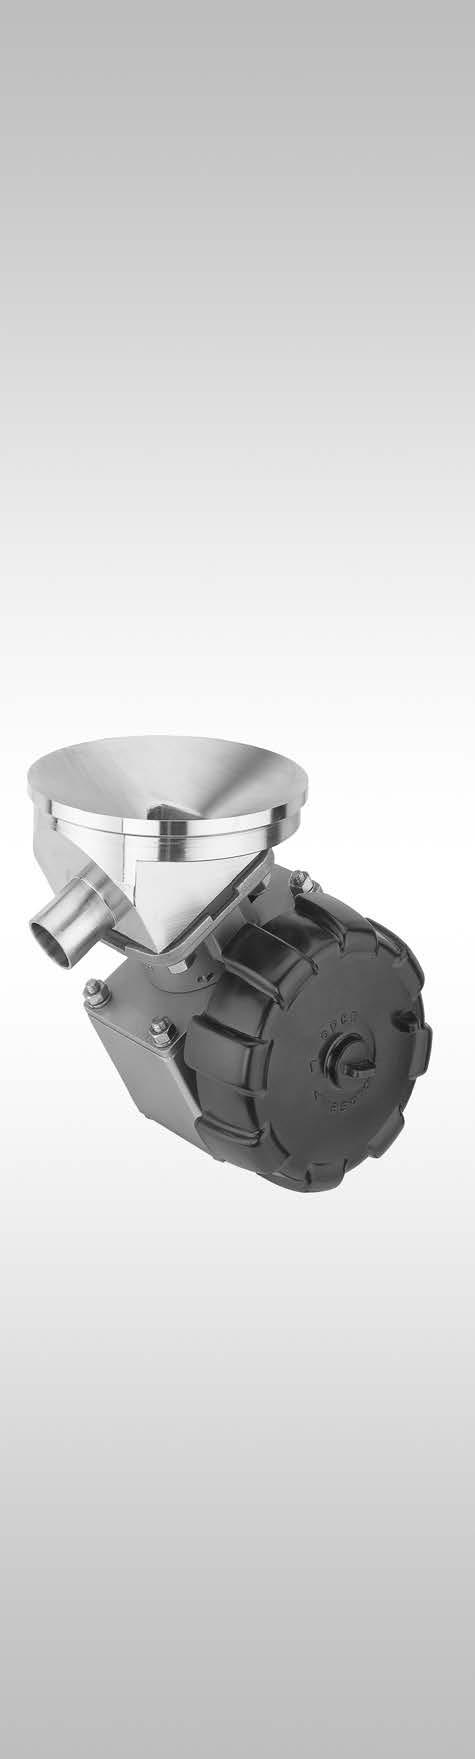 Tank Bottom Valve, Metal Construction The 2/2-way metal tank bottom valve GEMÜ is manually operated with a side mounted gear which has an optical position indicator